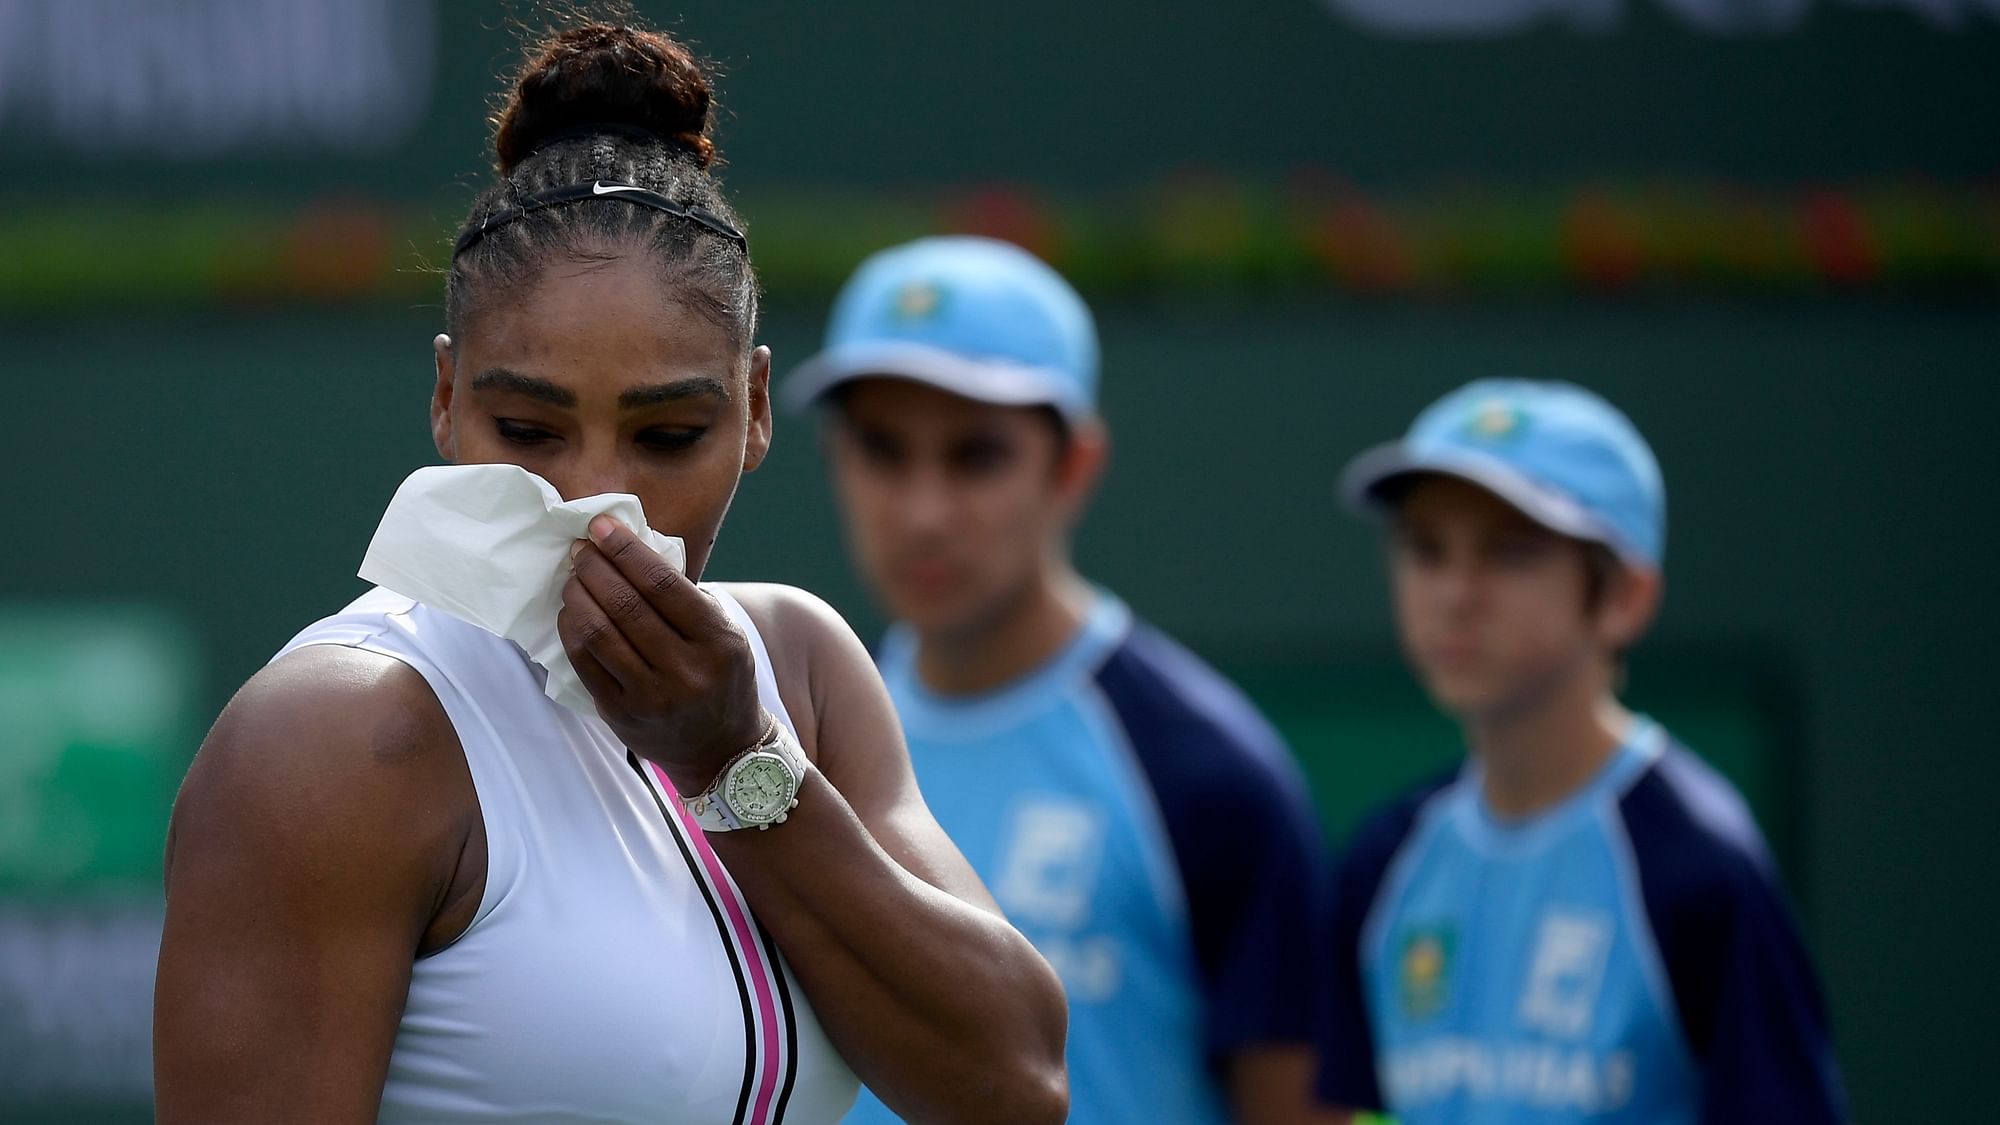 Serena Williams’ return to tennis after a five-week break ended early with her retiring from the BNP Paribas Open because of a viral illness.